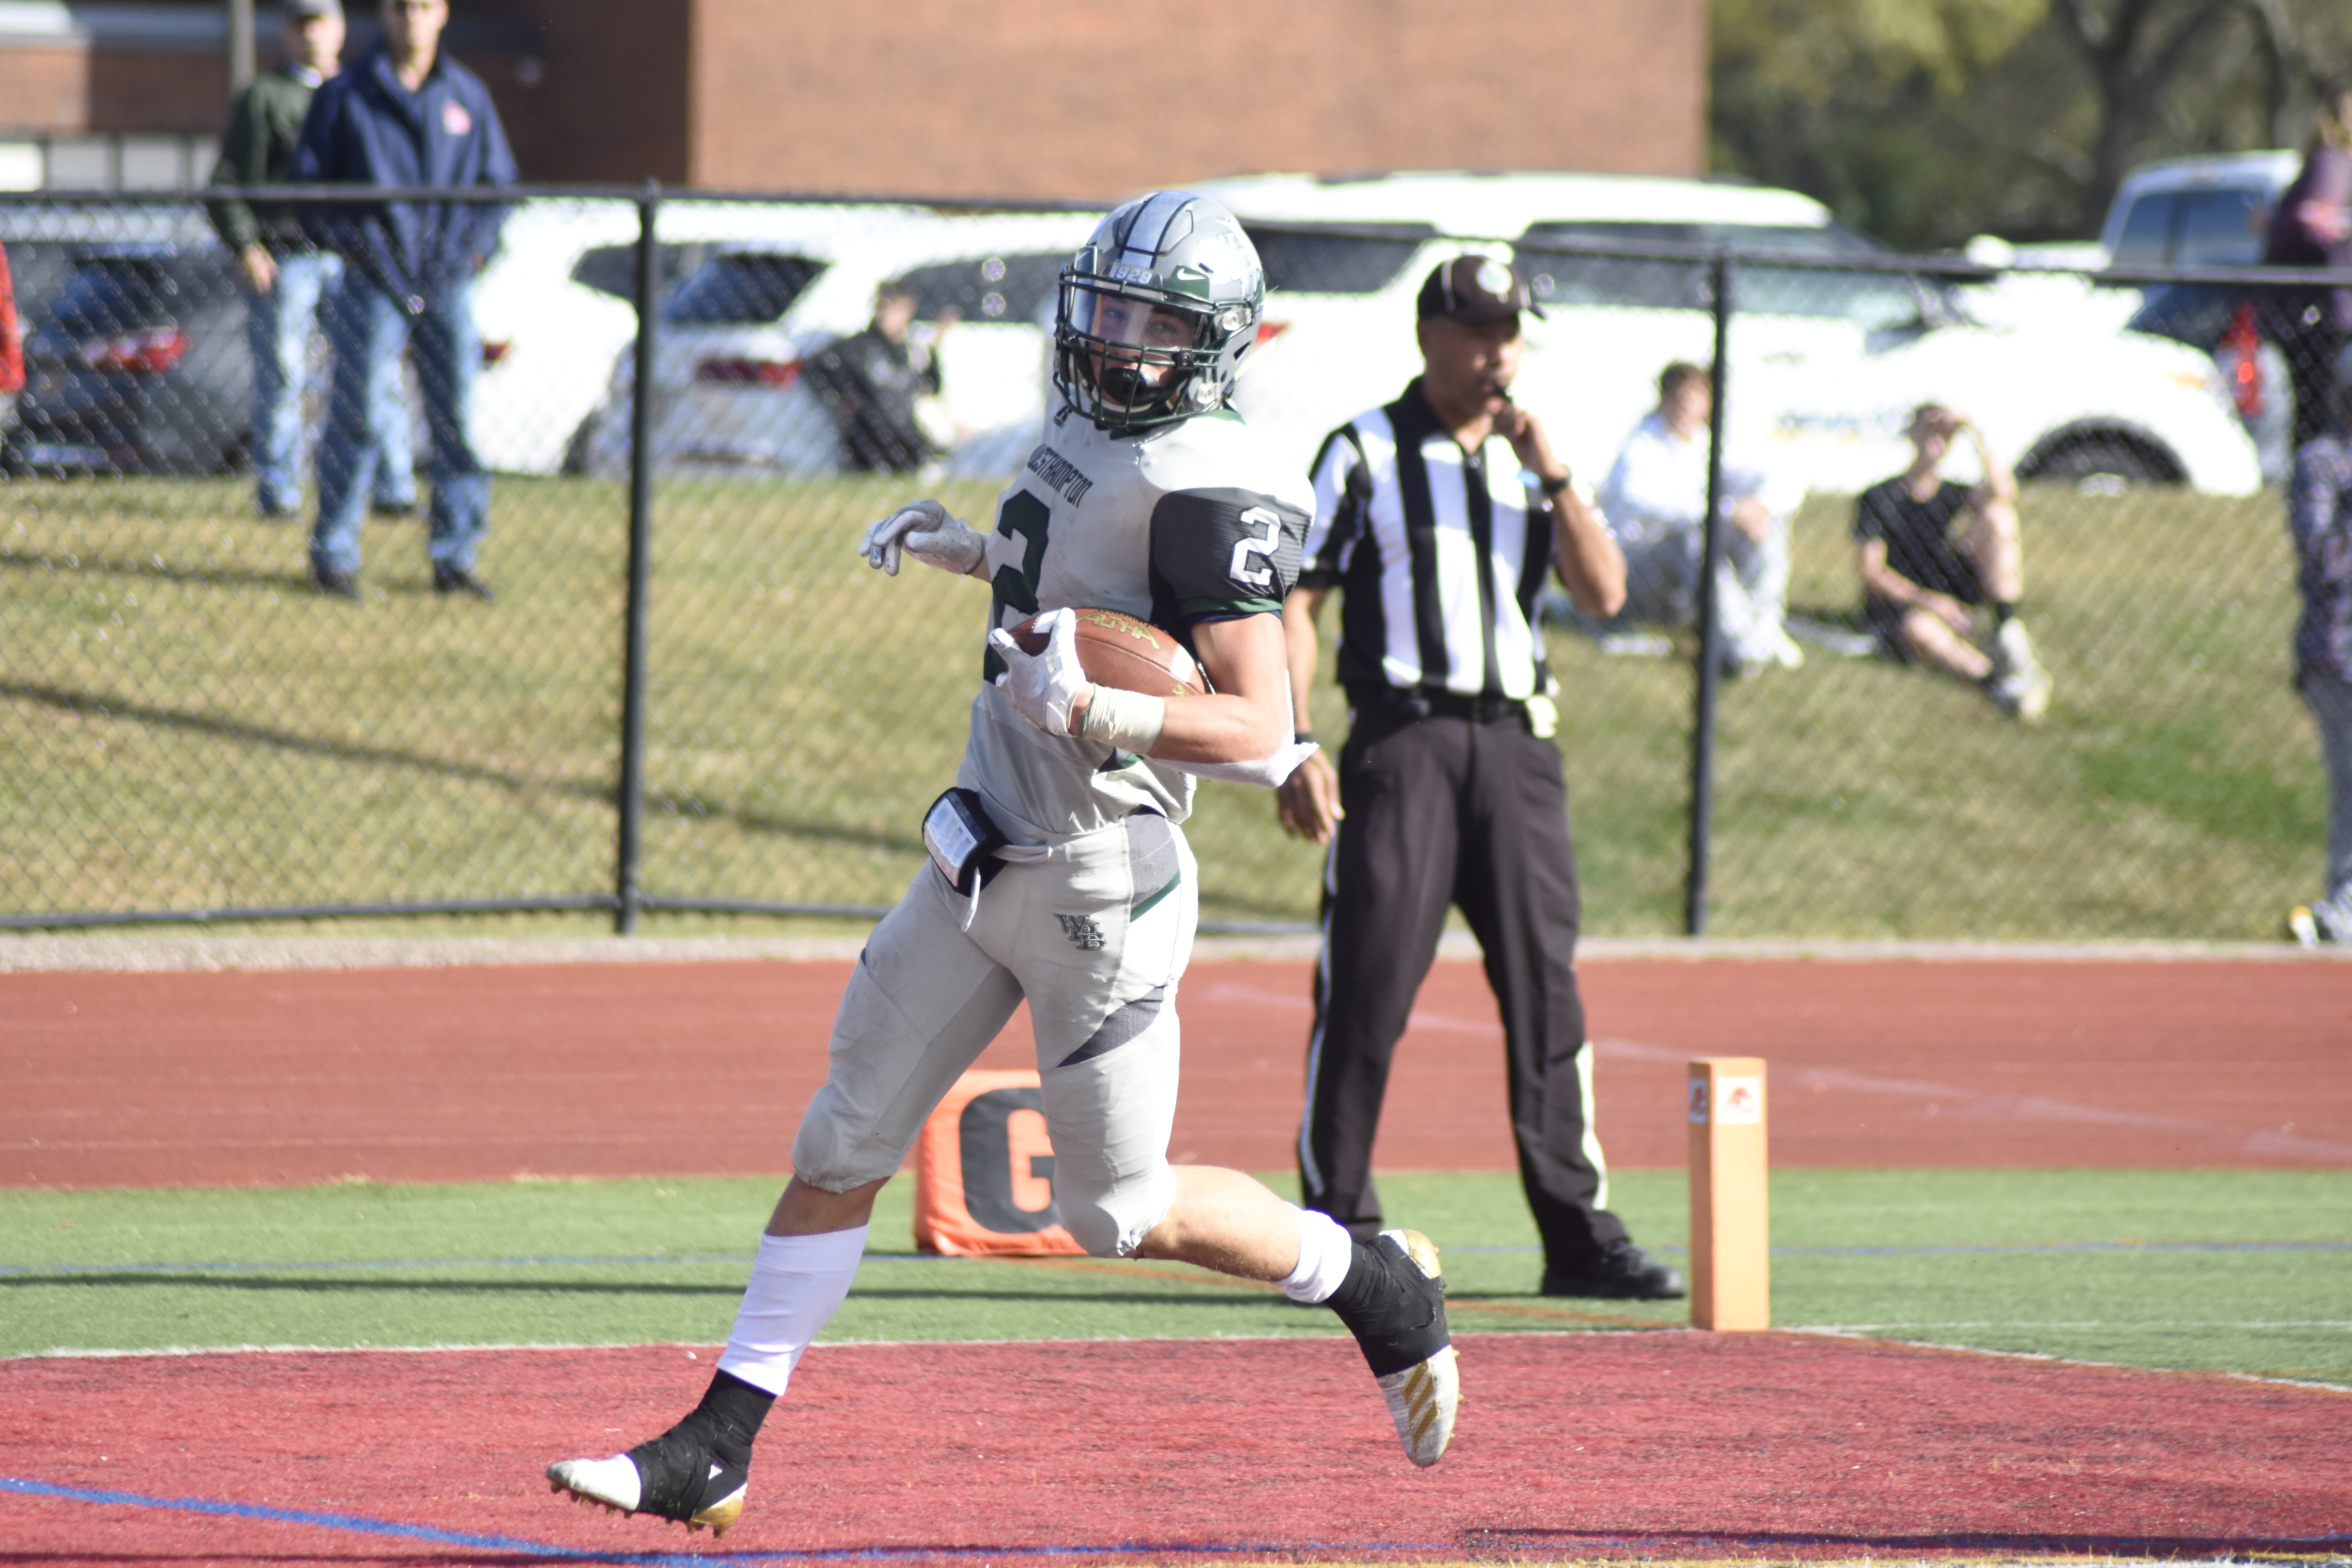 Westhampton Beach senior Jaden AlfanoStJohn rushed for 177 yards on 25 carries and scored all of the 'Canes three touchdowns on Saturday afternoon.